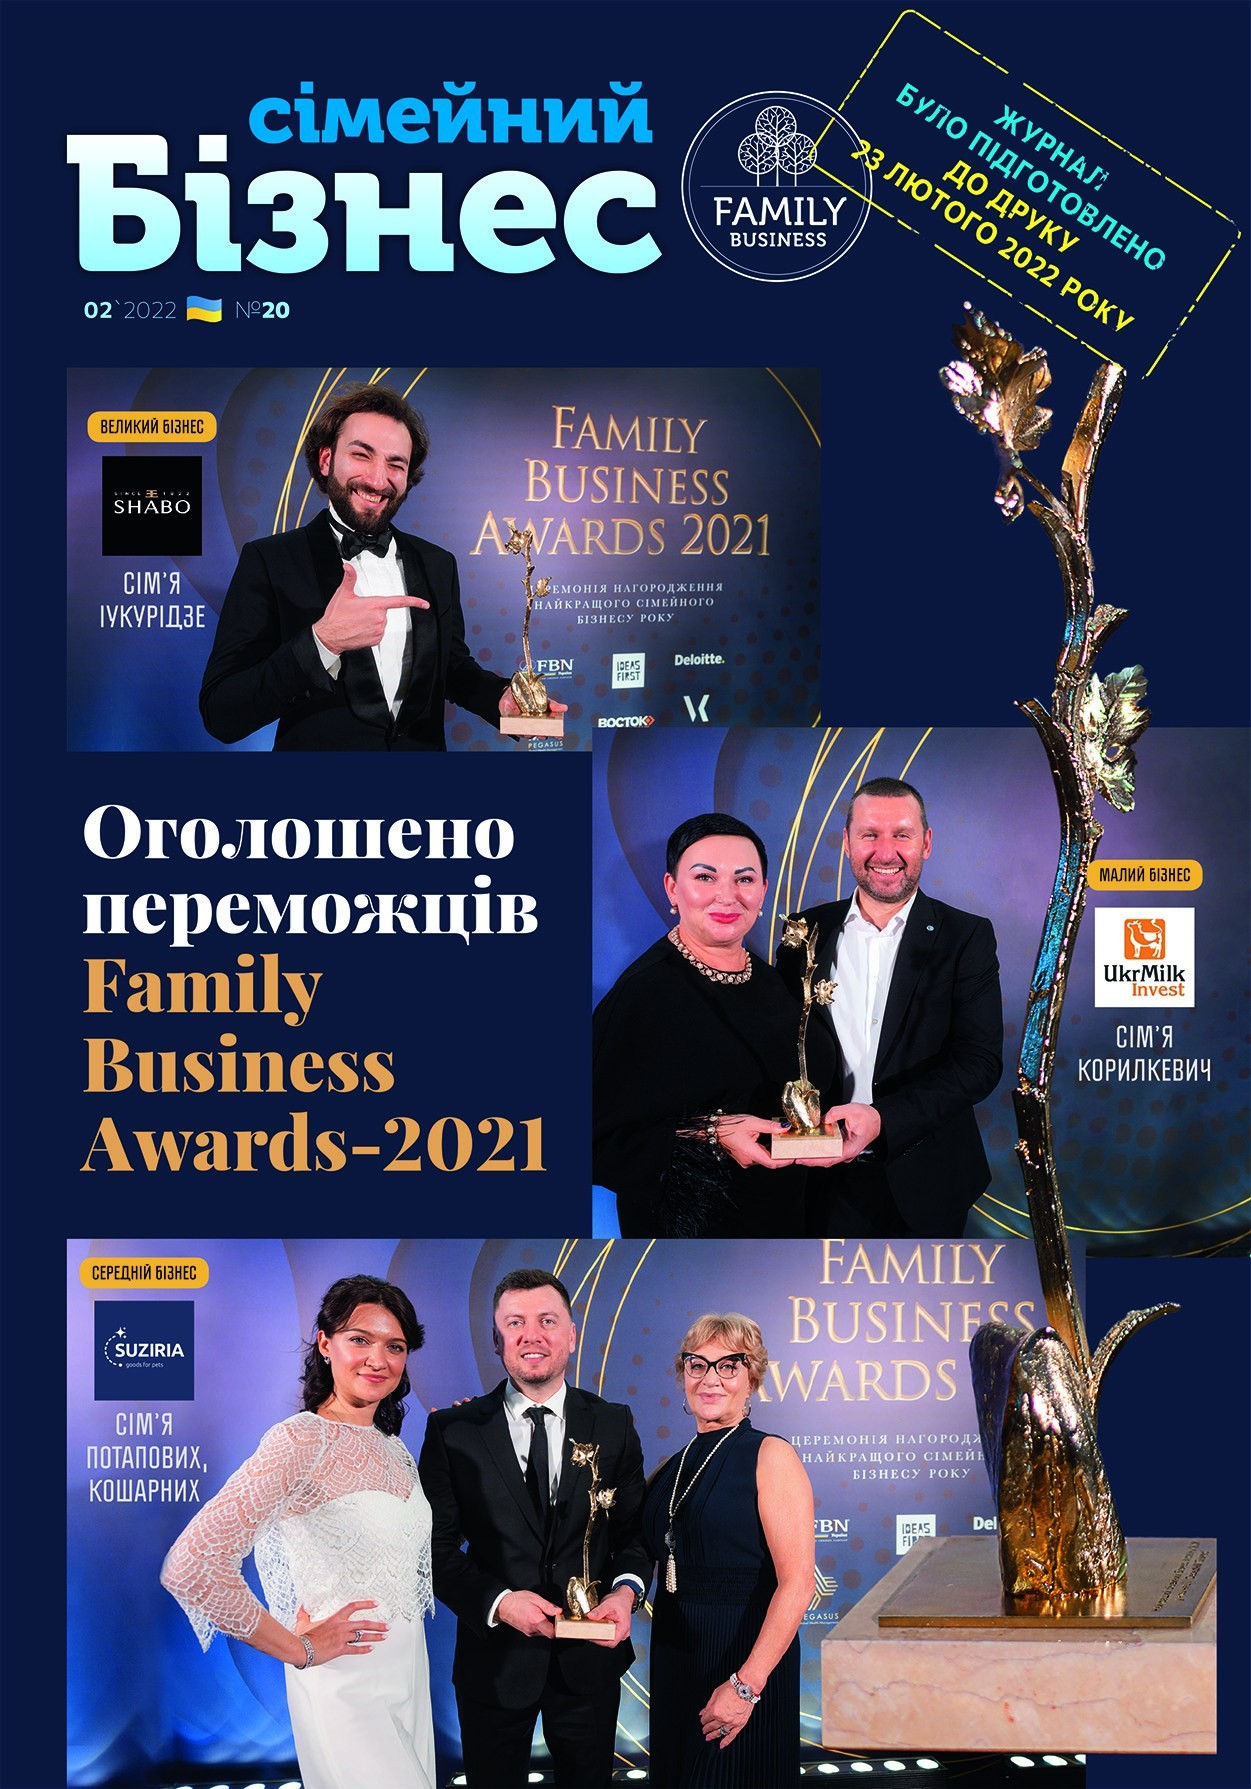 The 20th issue of the "Family Business" magazine was released